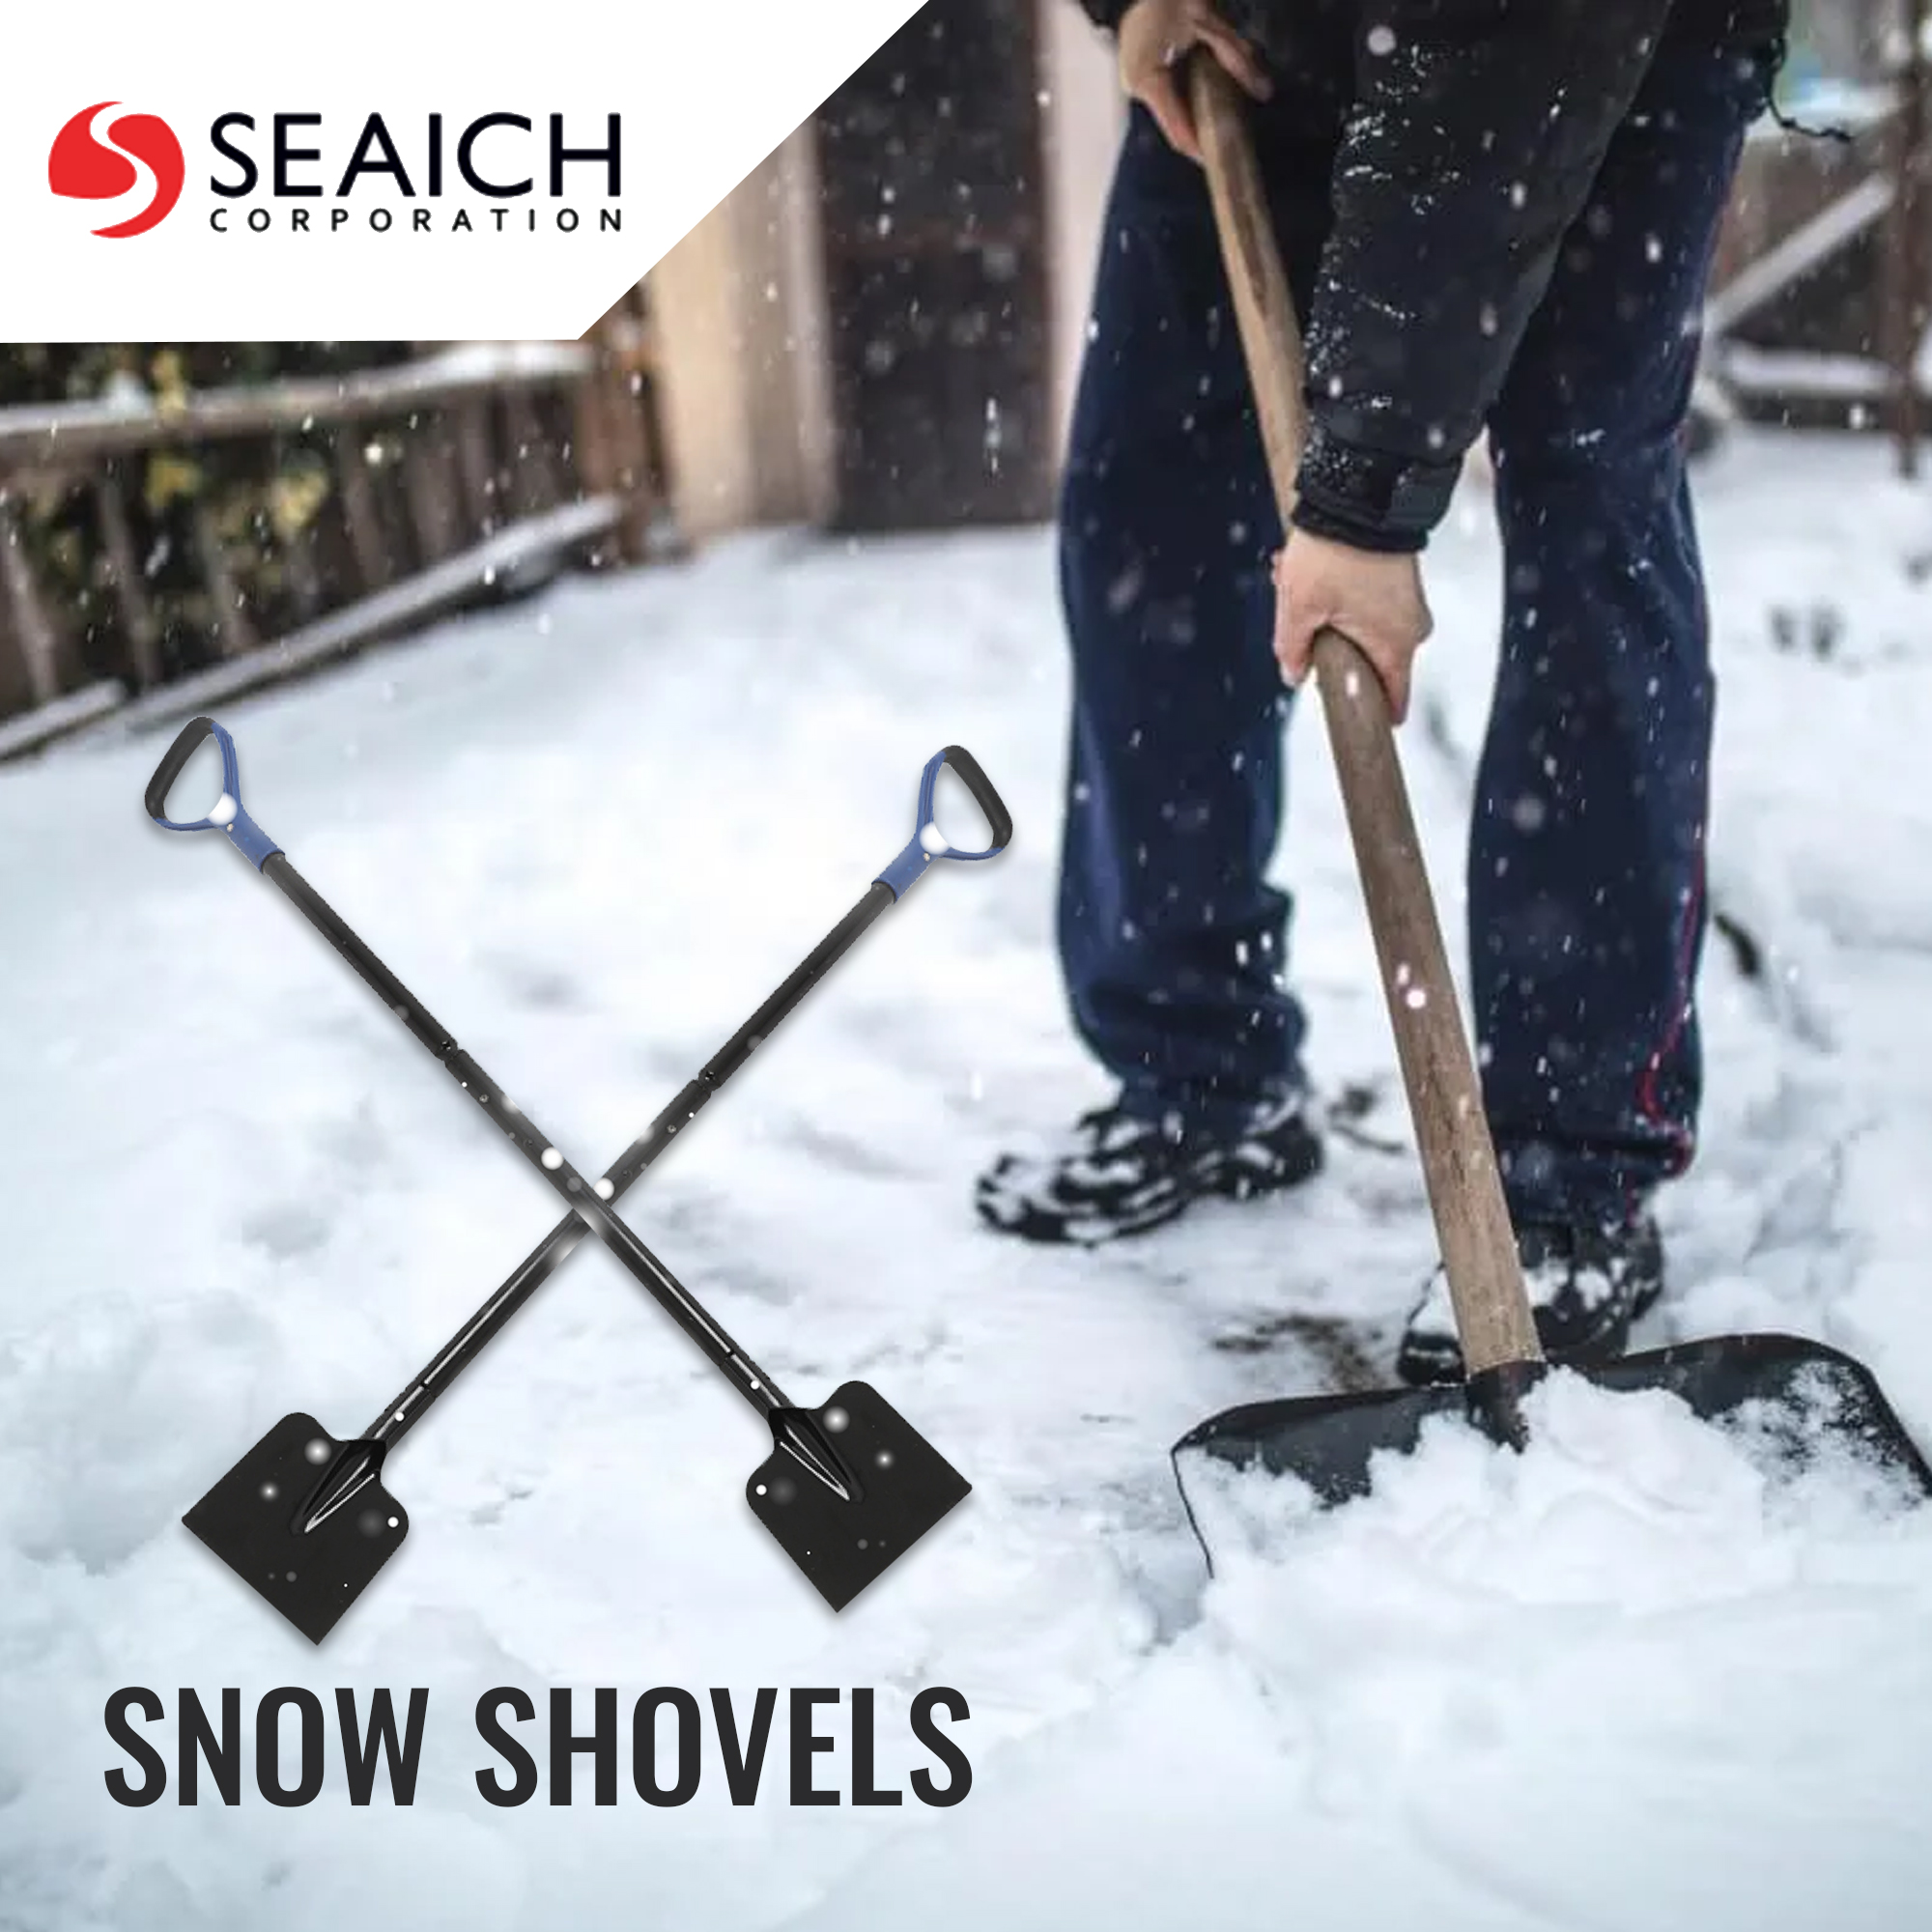 Seaich 48.4 Inch Steel Metal Snow Shovel Large Ergonomic Snow Shovels for  Driveway D-Ring Handle Winter Snow Removal Tool in Black Color Rust  Proof Deep Blade Shovel